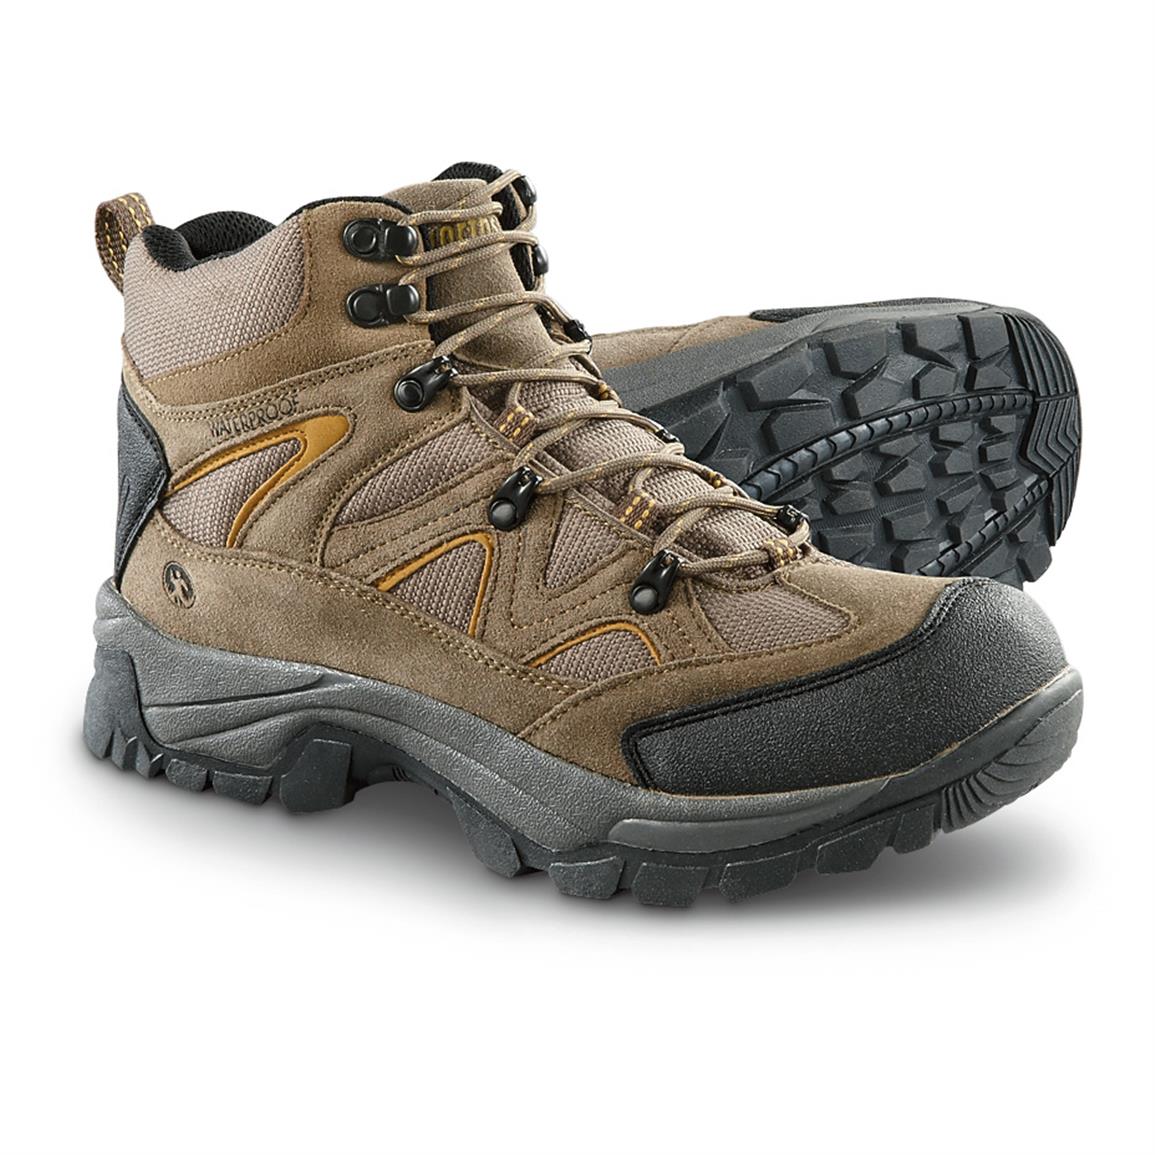 Northside Snohomish Waterproof Mid Hiking Boots - 622035, Hiking Boots ...